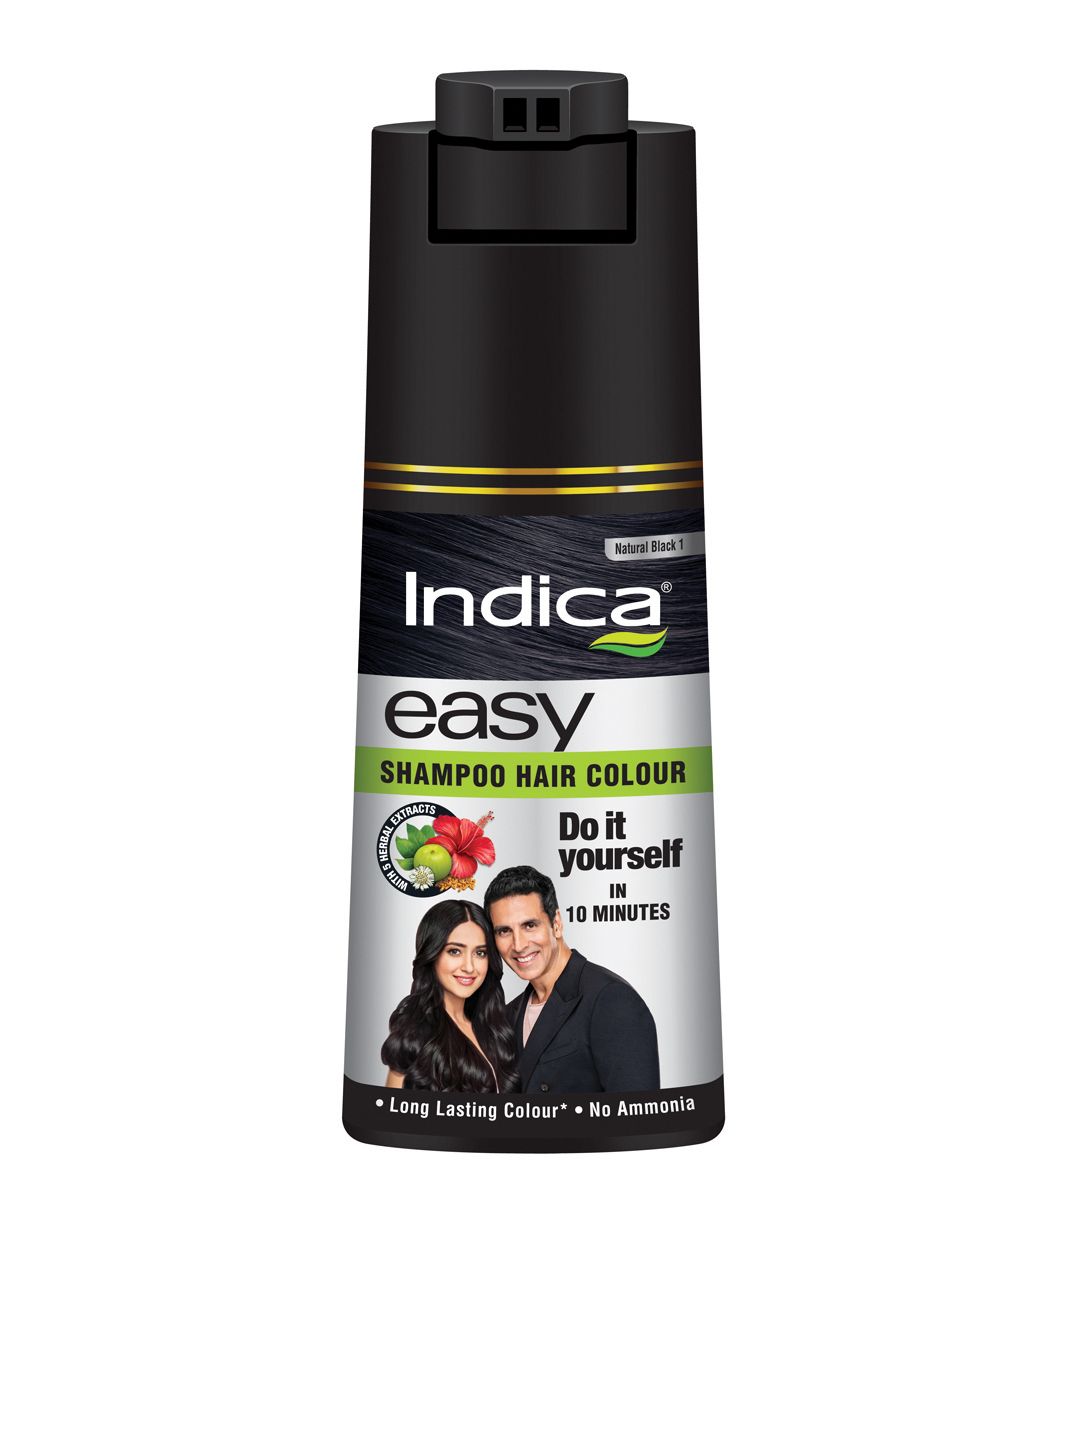 INDICA Easy Do-It-Yourself Hair Color Shampoo Pump Pack - Natural Black 1 - 180 ml Price in India